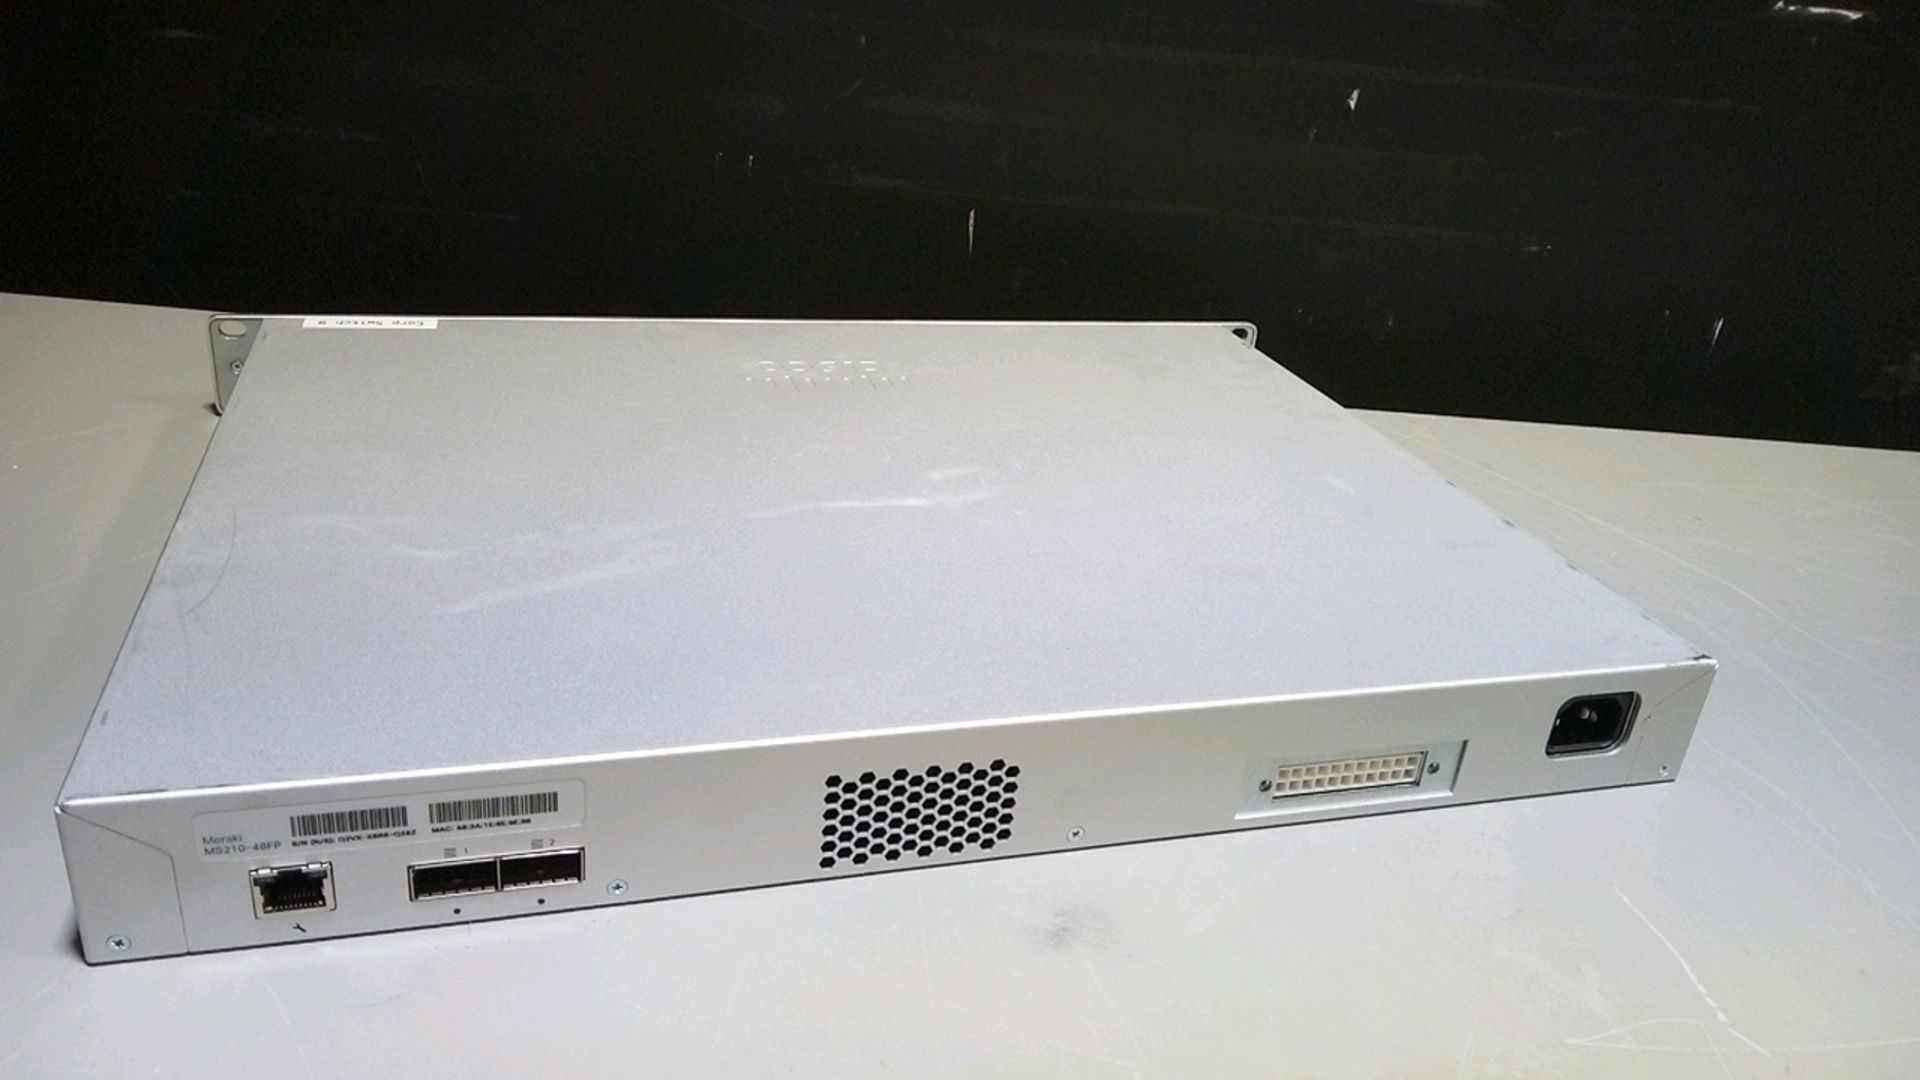 CISCO SYSTEMS MERAKI M210-48FP SWITCH LOCATED AT: 2440 GREENLEAF AVE, ELK GROVE VILLAGE IL - Image 2 of 3